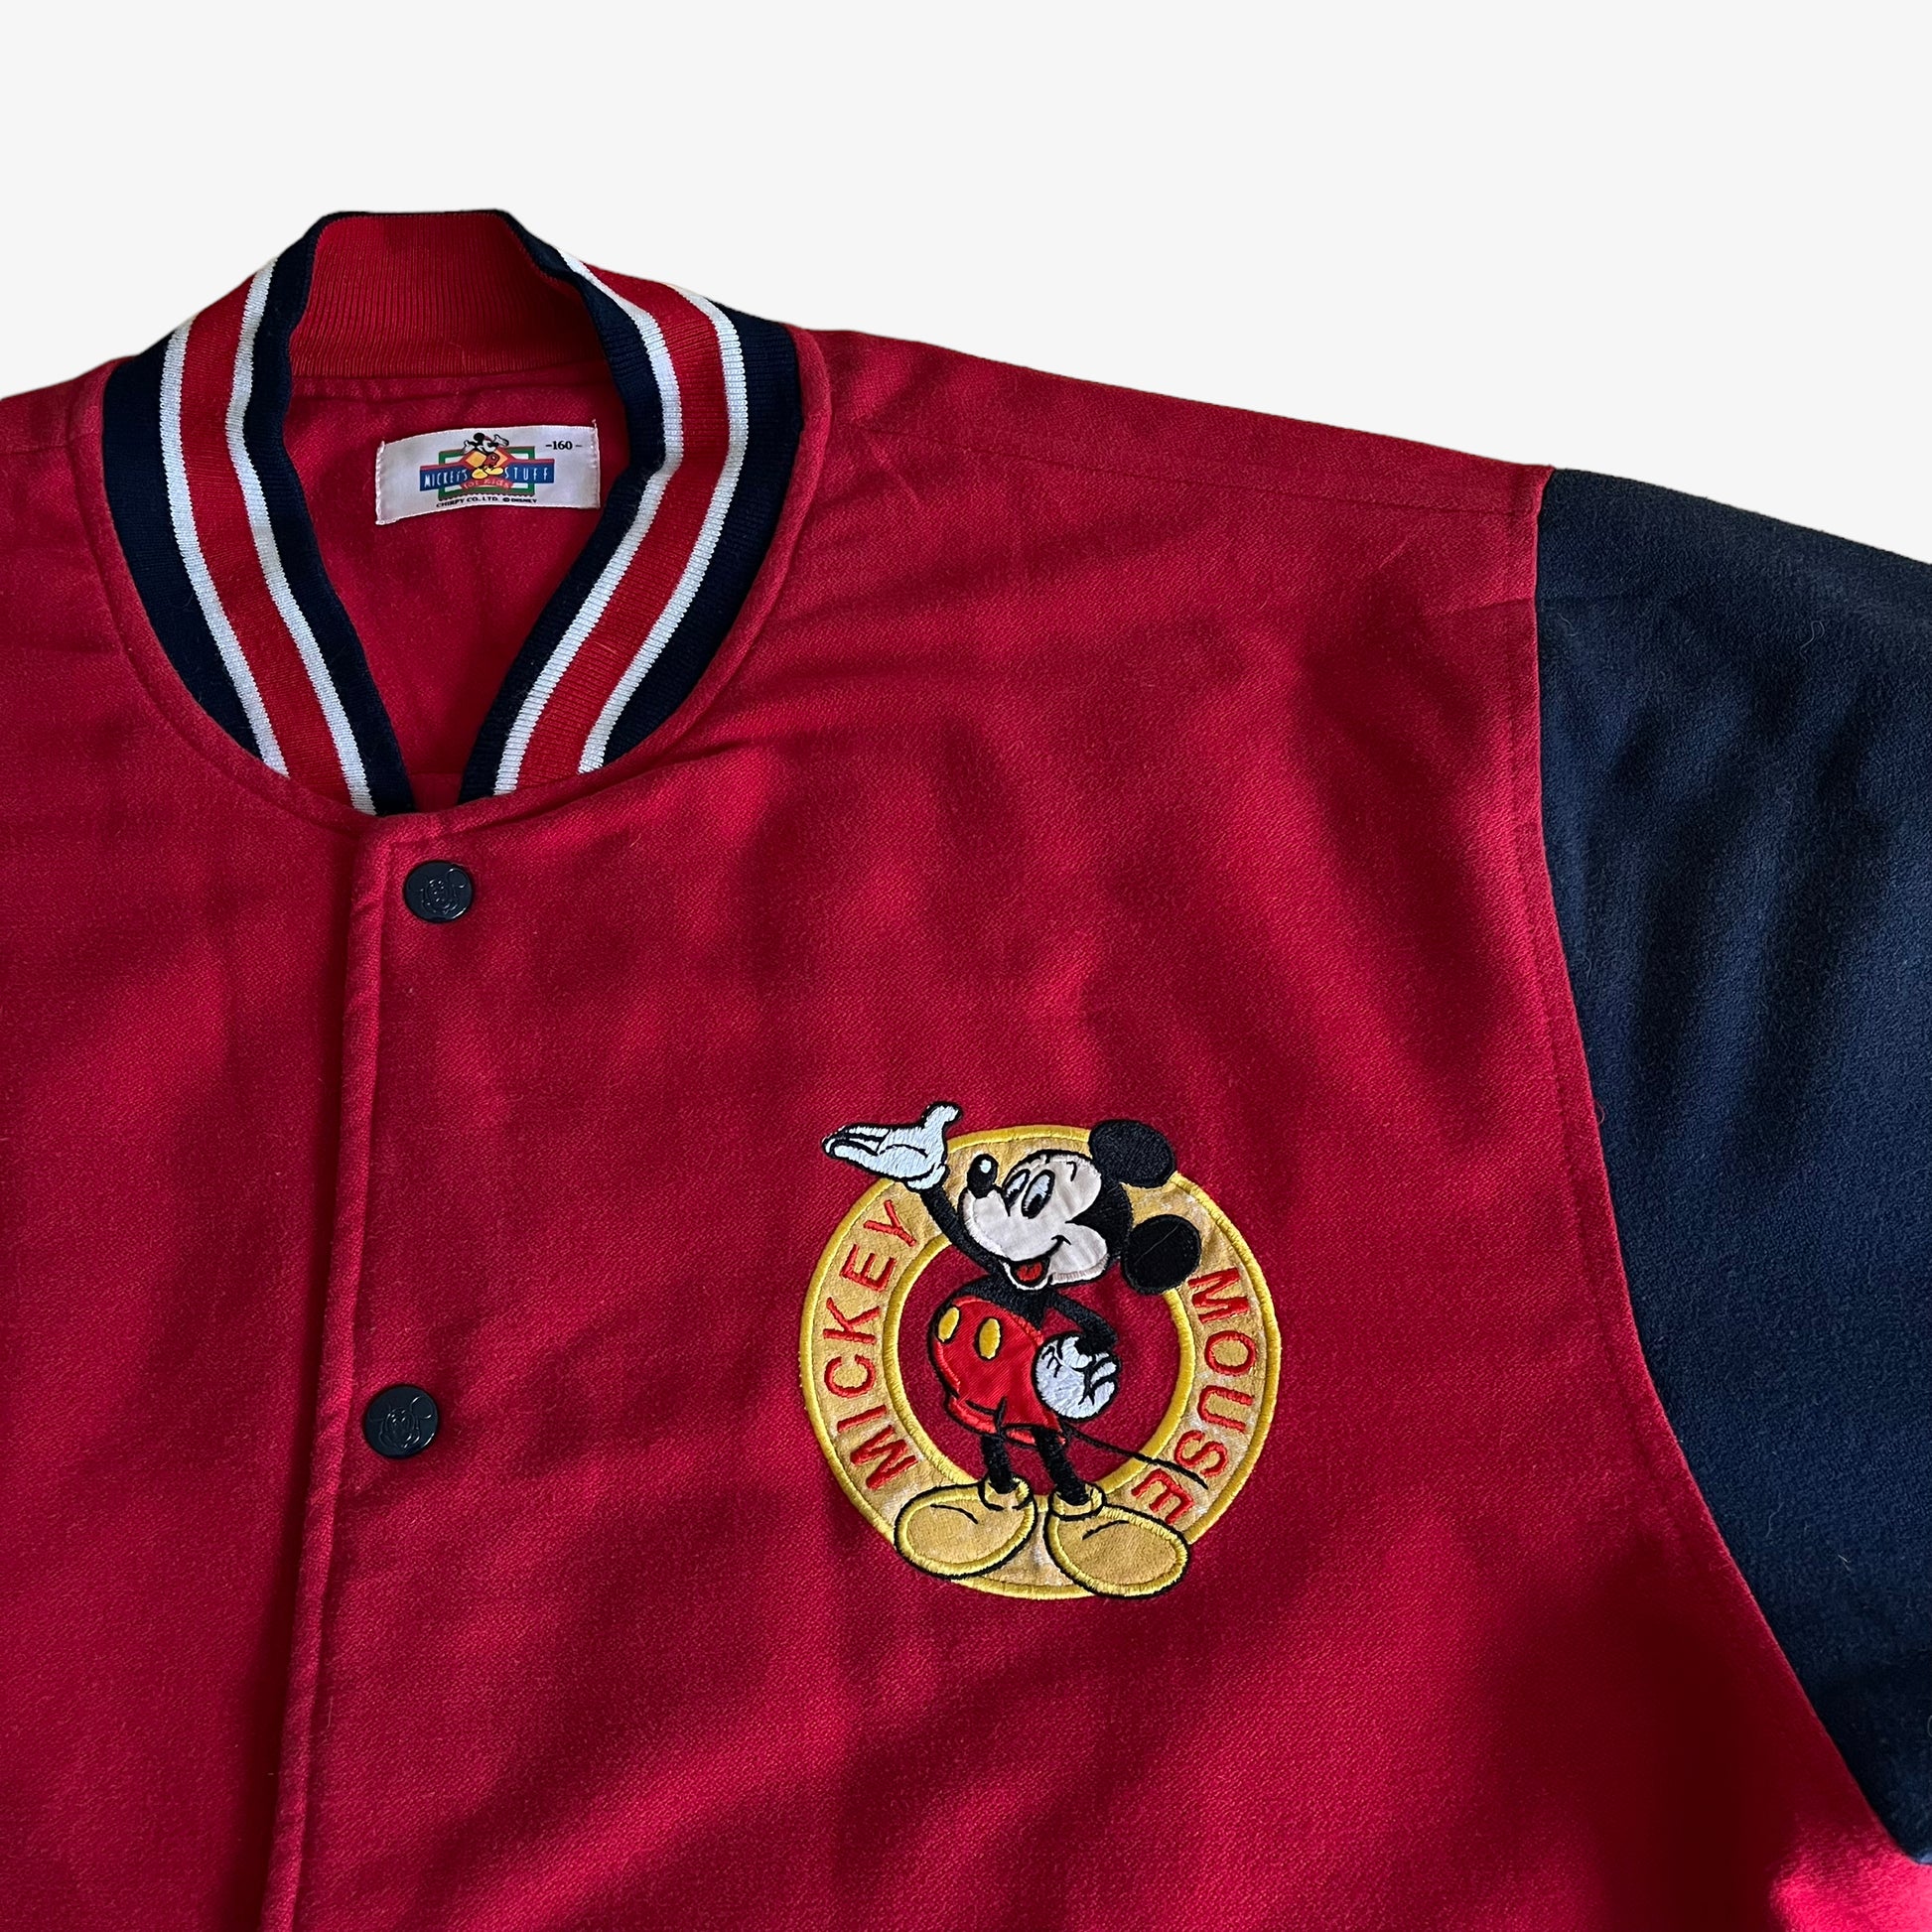 Vintage 90s Disney Mickeys Stuff Varsity Jacket With Back Embroidered Spell Out Logo - Casspios Dream